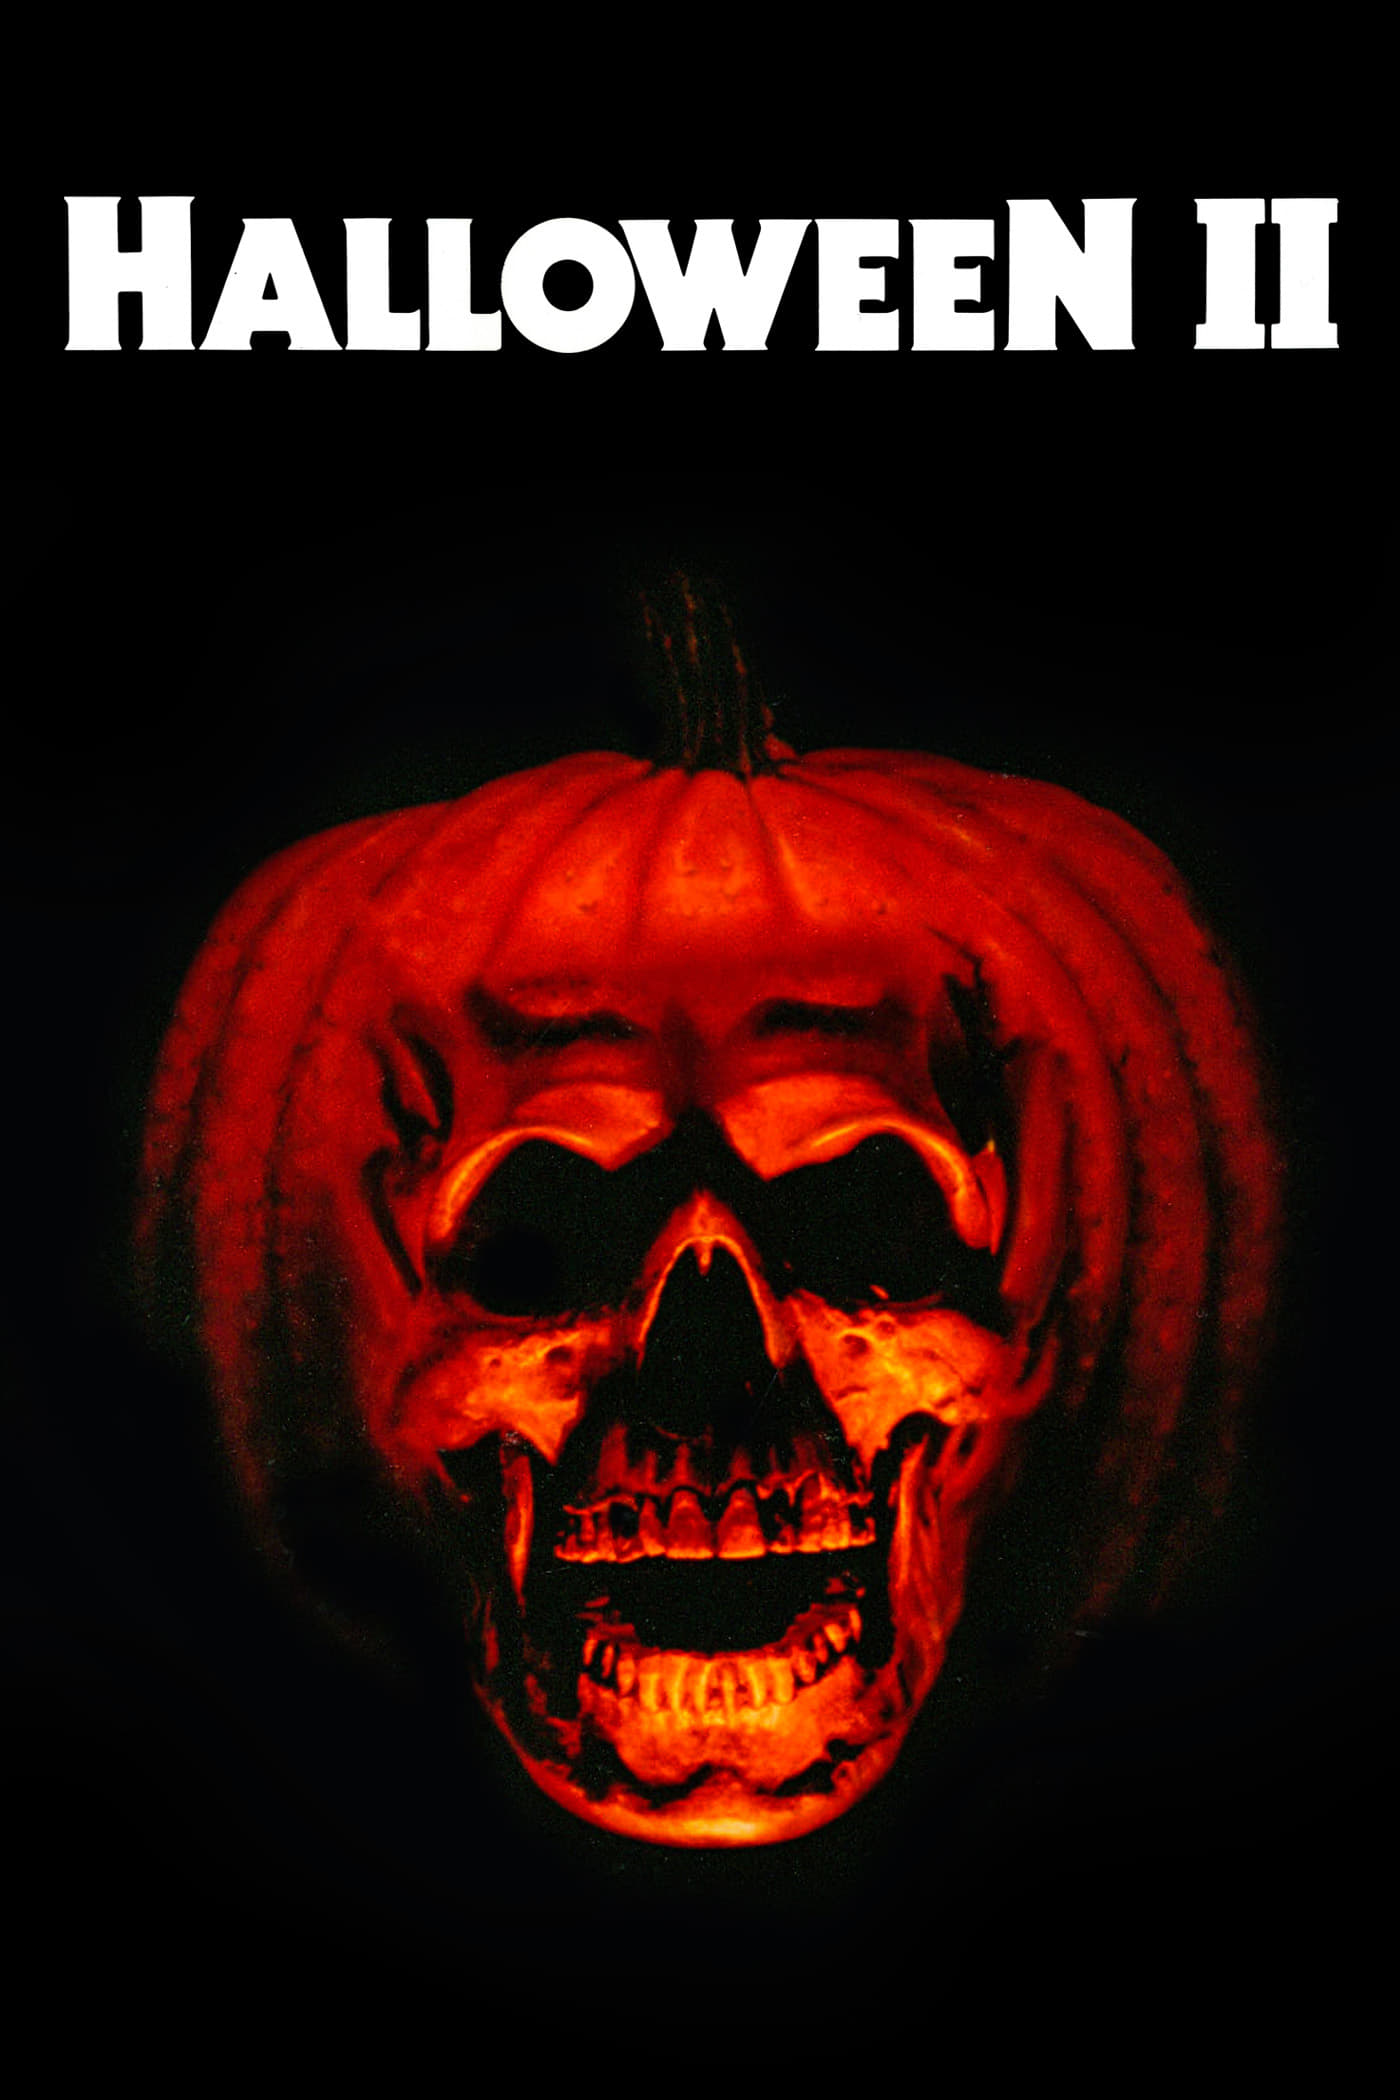 Halloween 2 - Le cauchemar n'est pas fini (1981) Streaming Complet VF